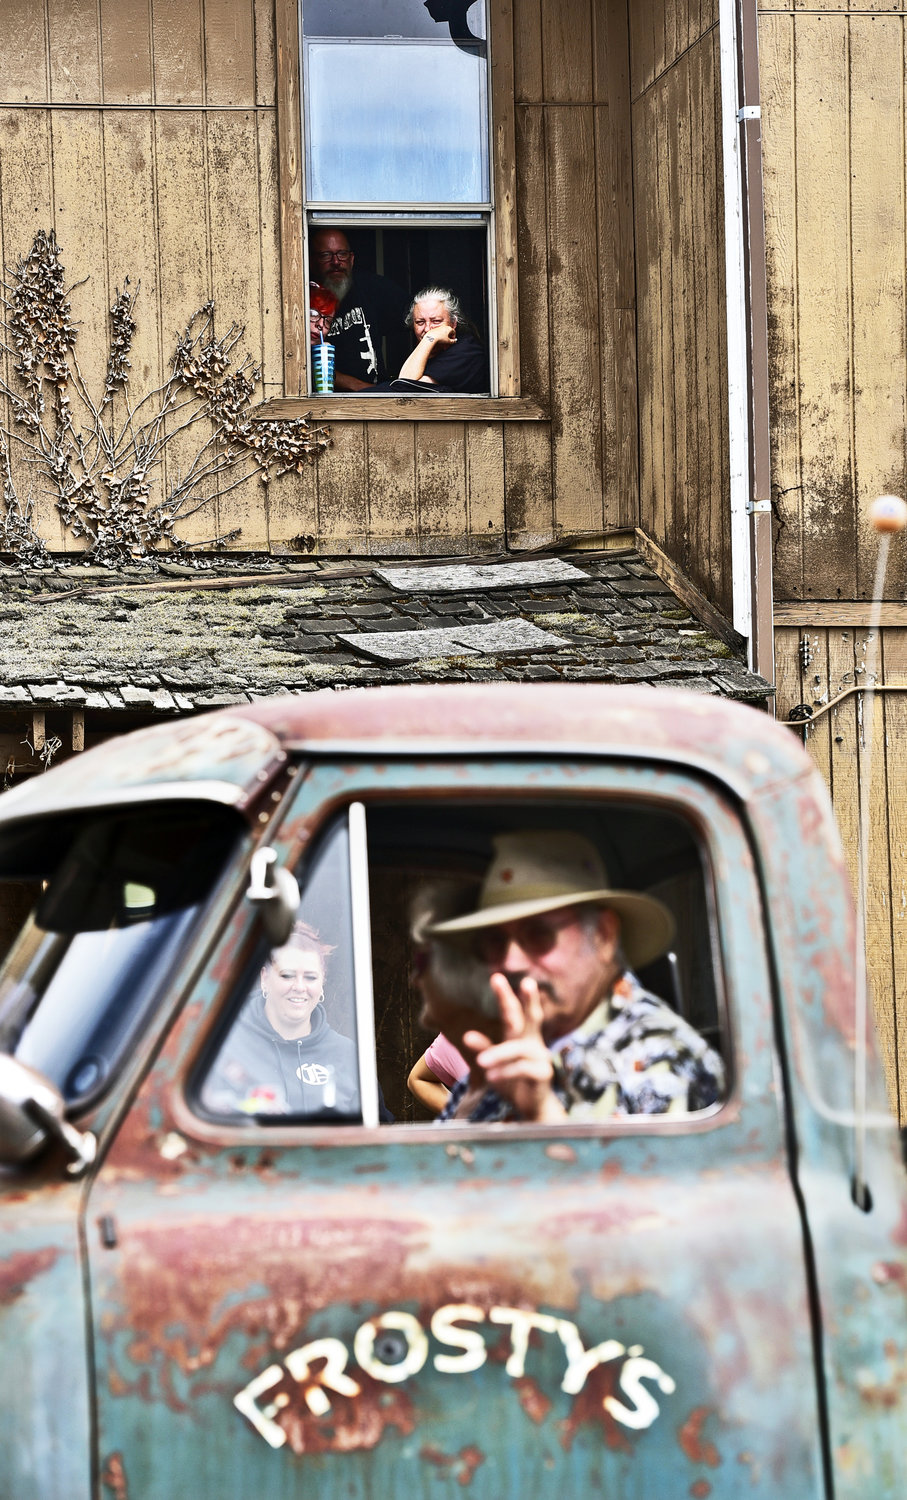 From their perch above Oakville’s main drag in what appeared to be a dilapidated building, a man and woman watch Oakville’s Independence Day parade on Saturday, July 3, as a parade participant signals from an old pickup truck.